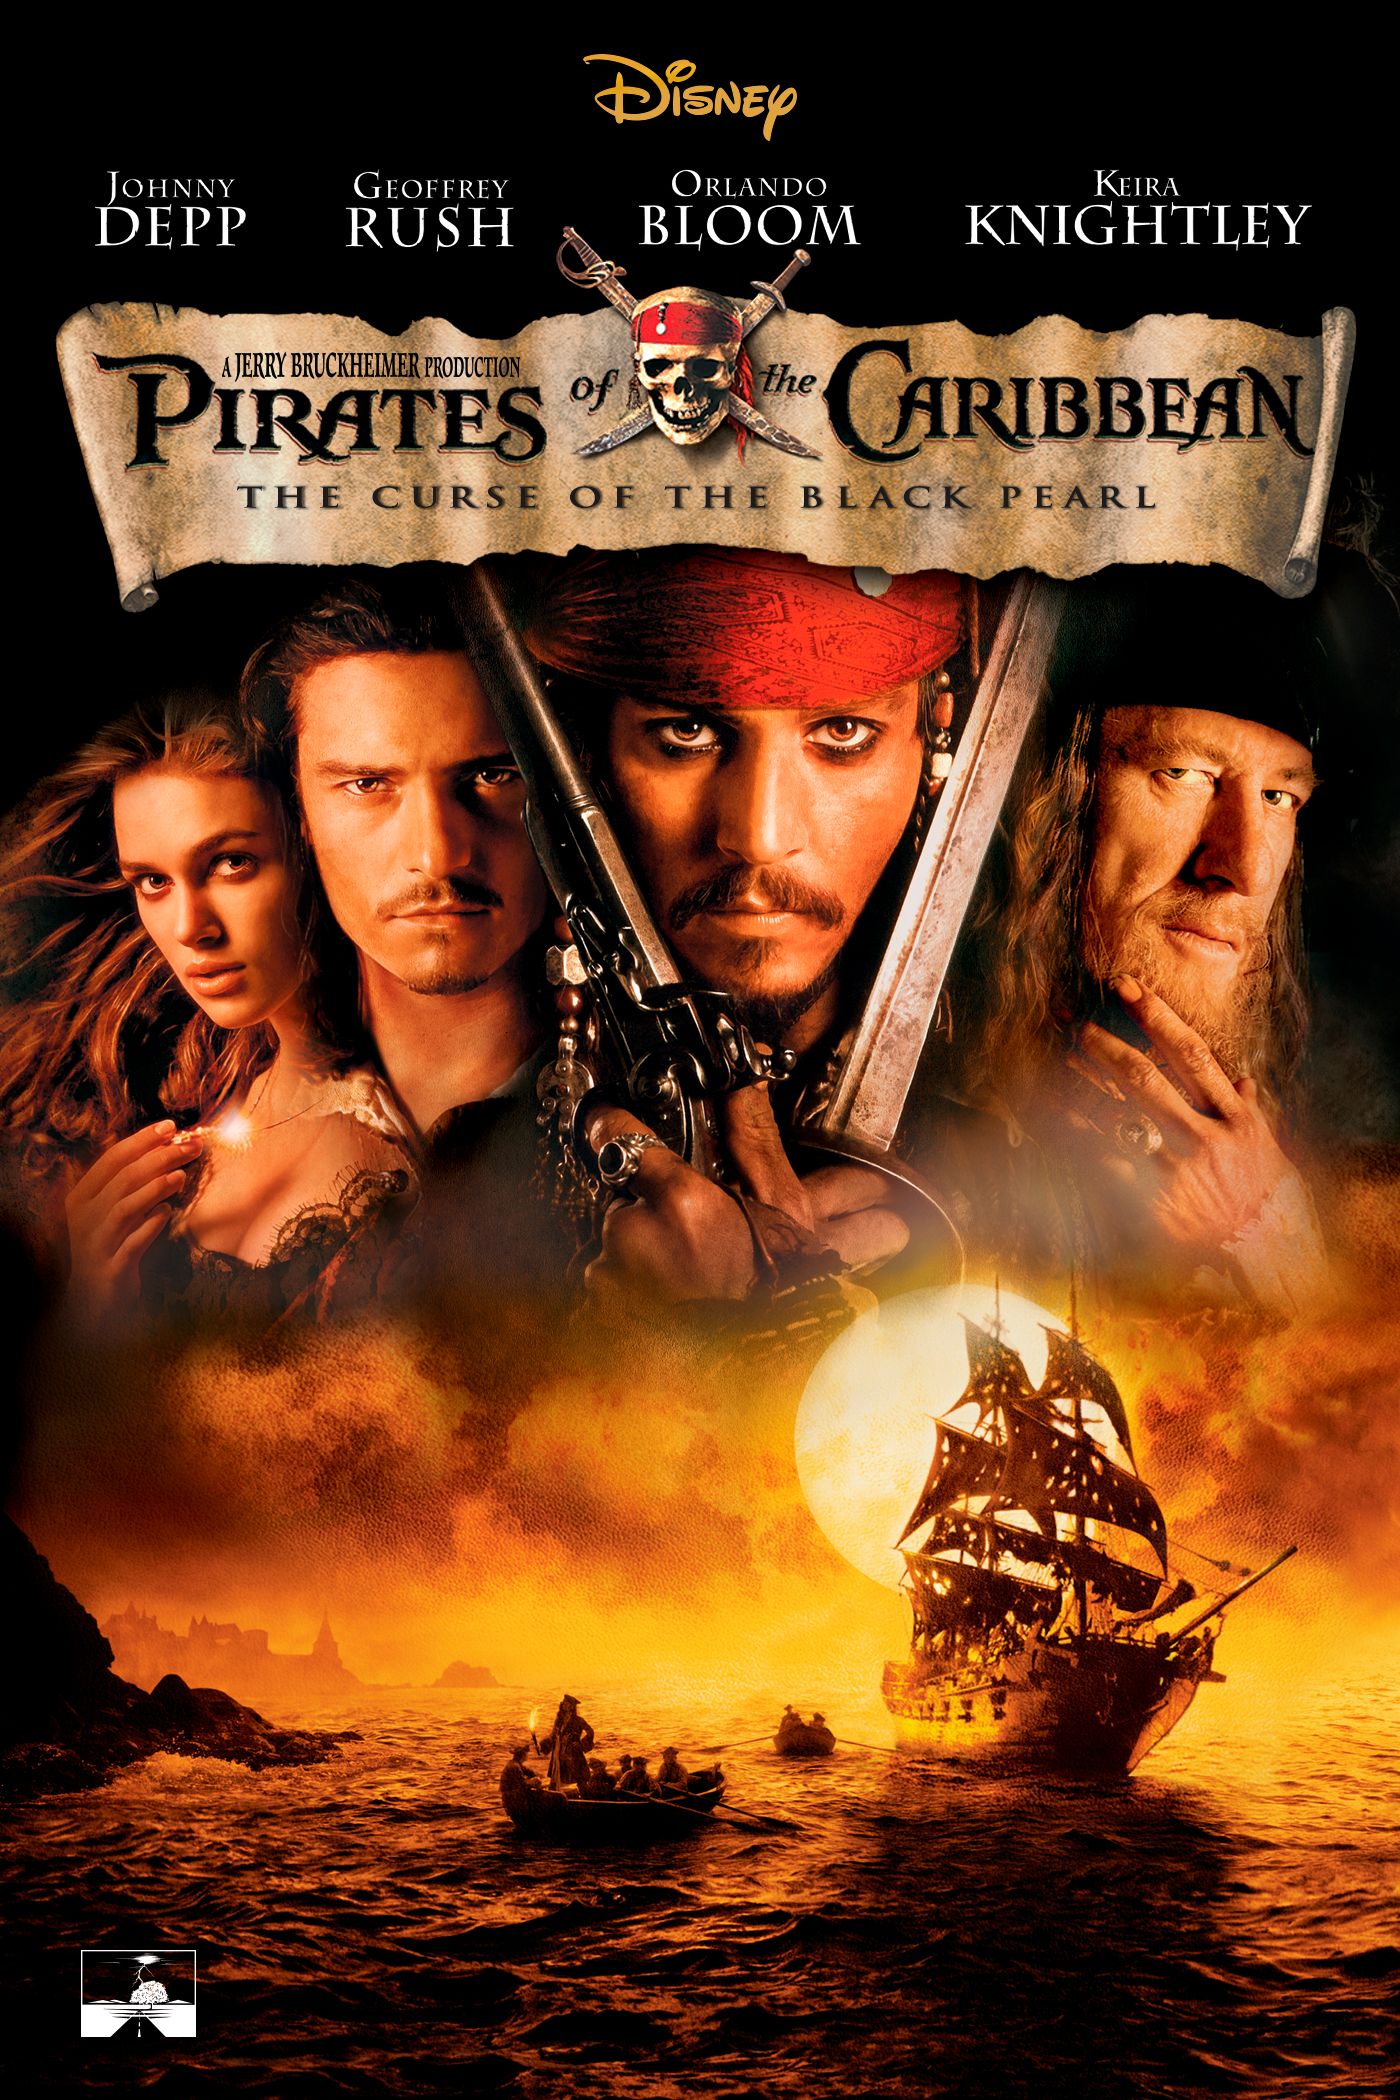 pirates 2005 movie free download for mobile